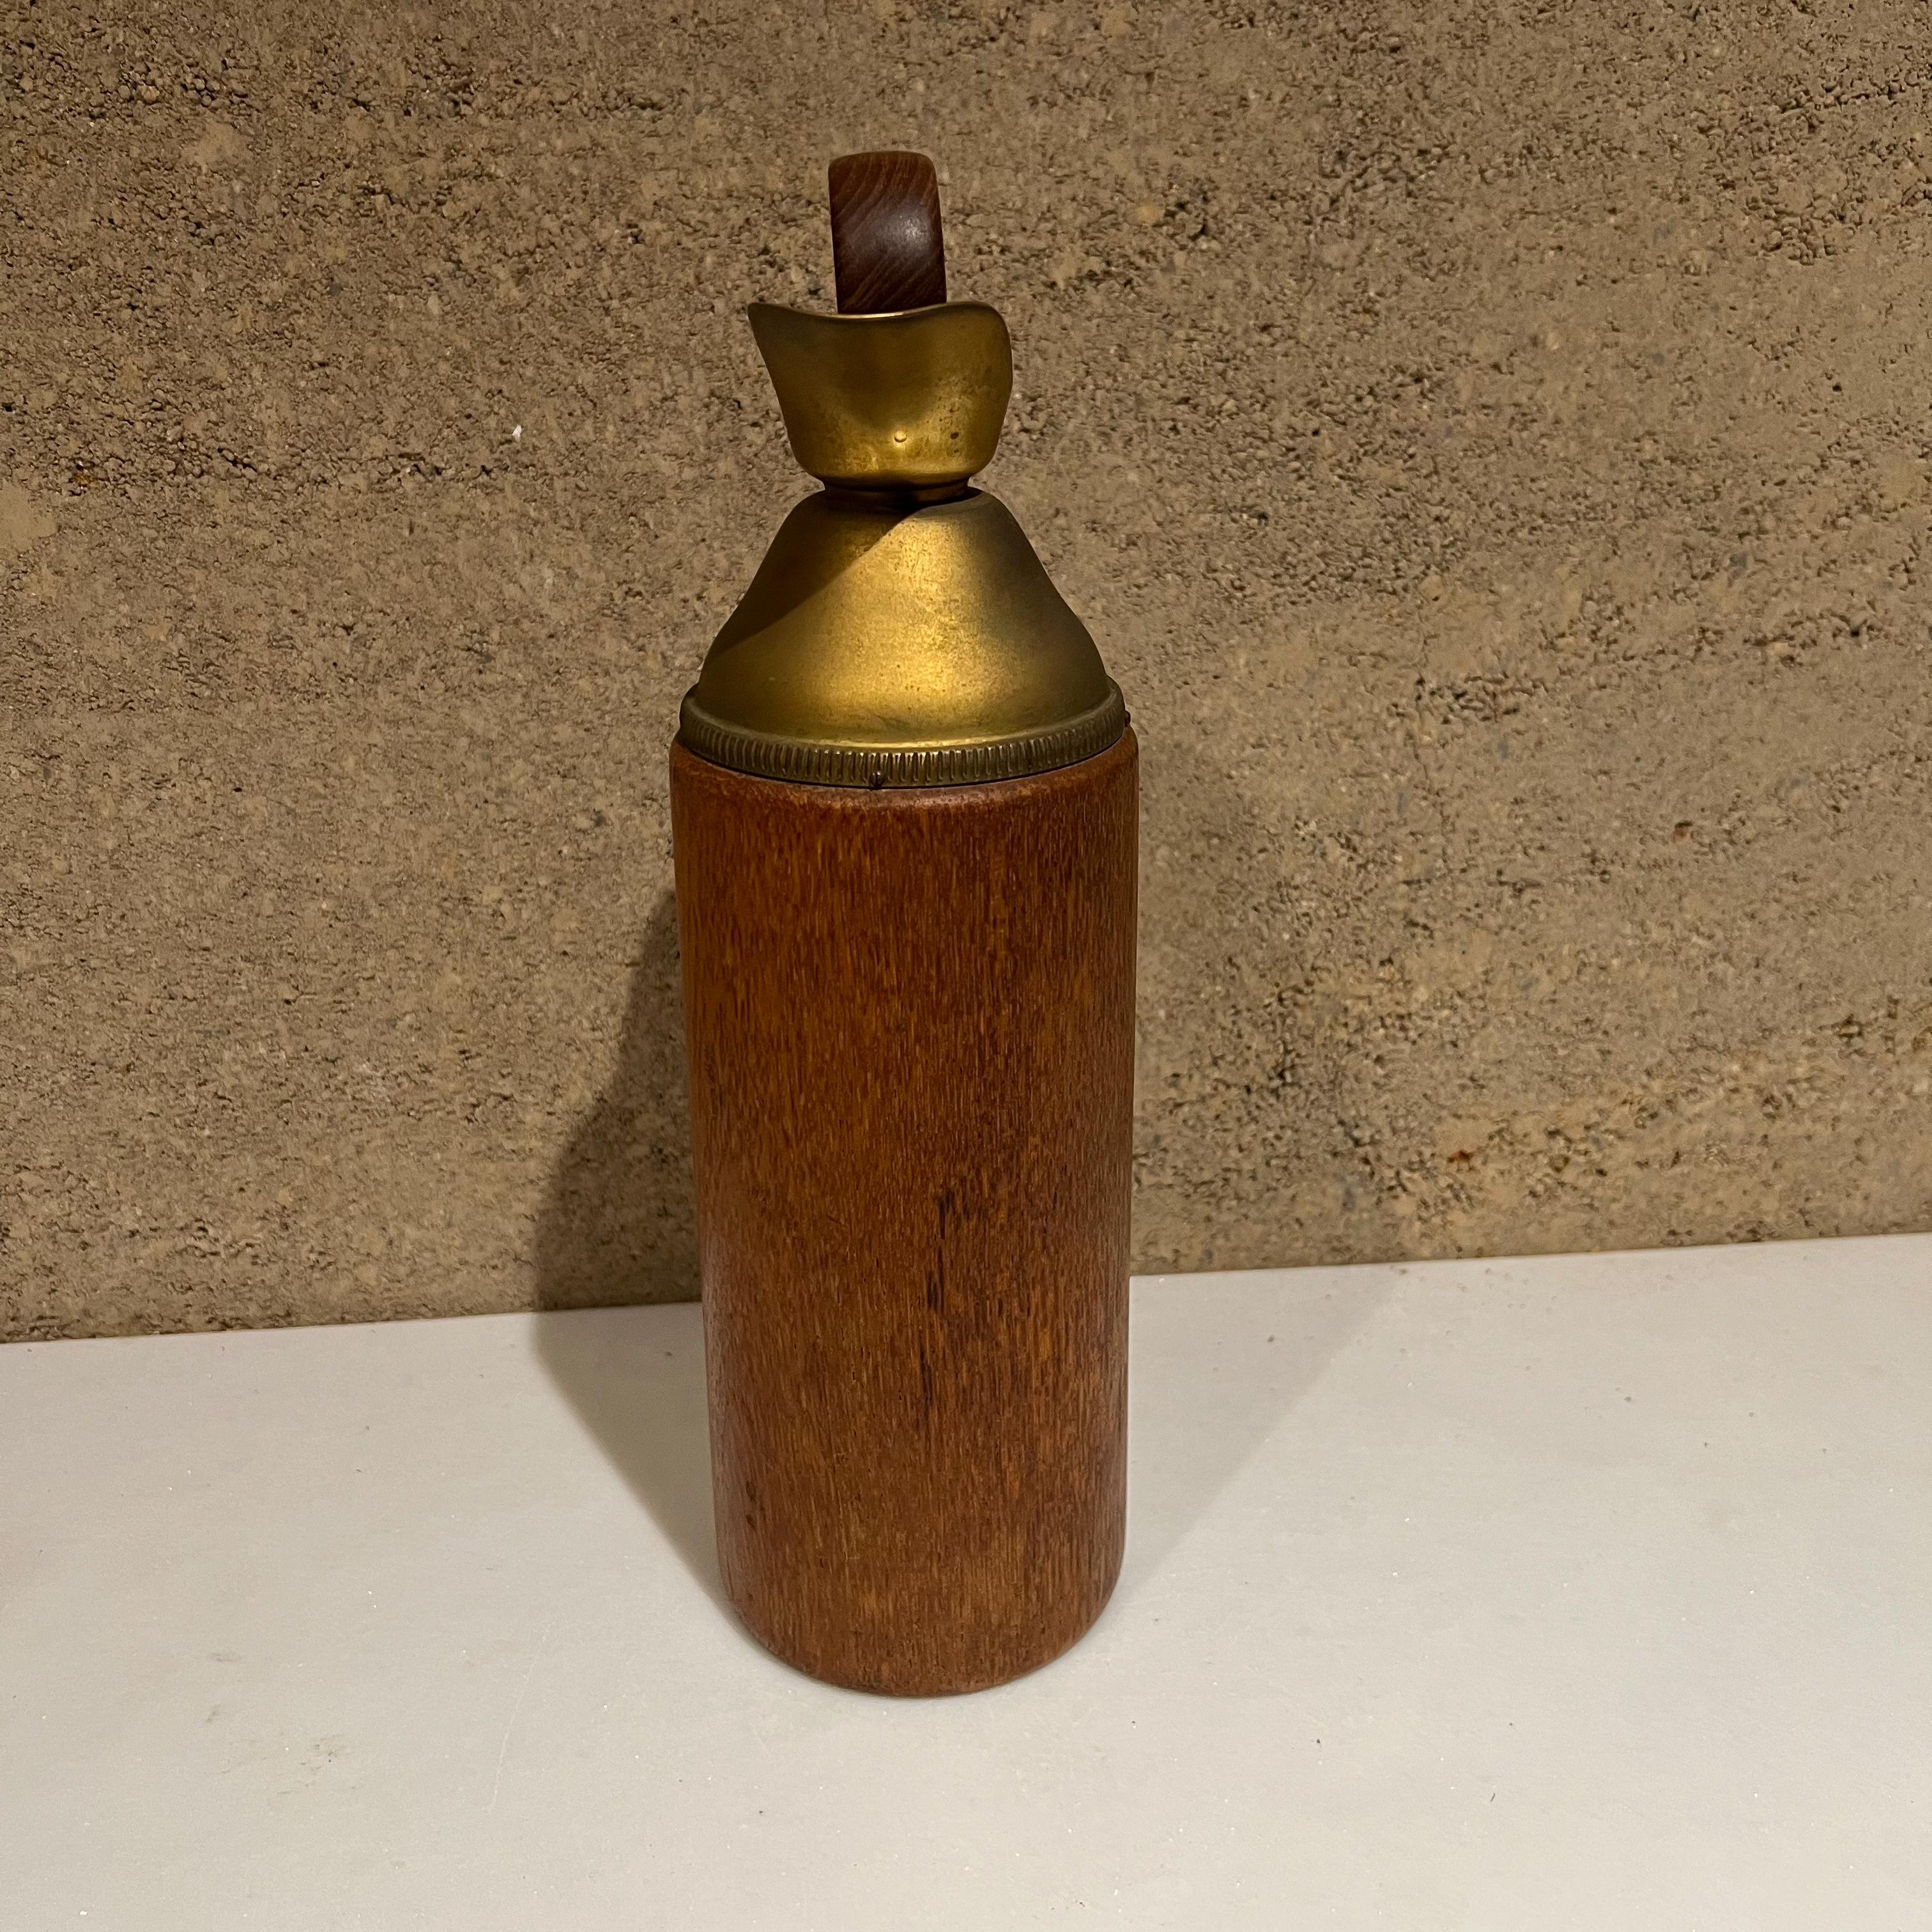 1950s Italian pitcher (carafe thermos) by Aldo Tura ITALY
Designed in Brass and Teakwood.
Unmarked.
Measures: 12.5 tall x 3.75 diameter x 5.25 depth
Brass & wood have vintage patina. 
Original cork is missing and replaced with vintage